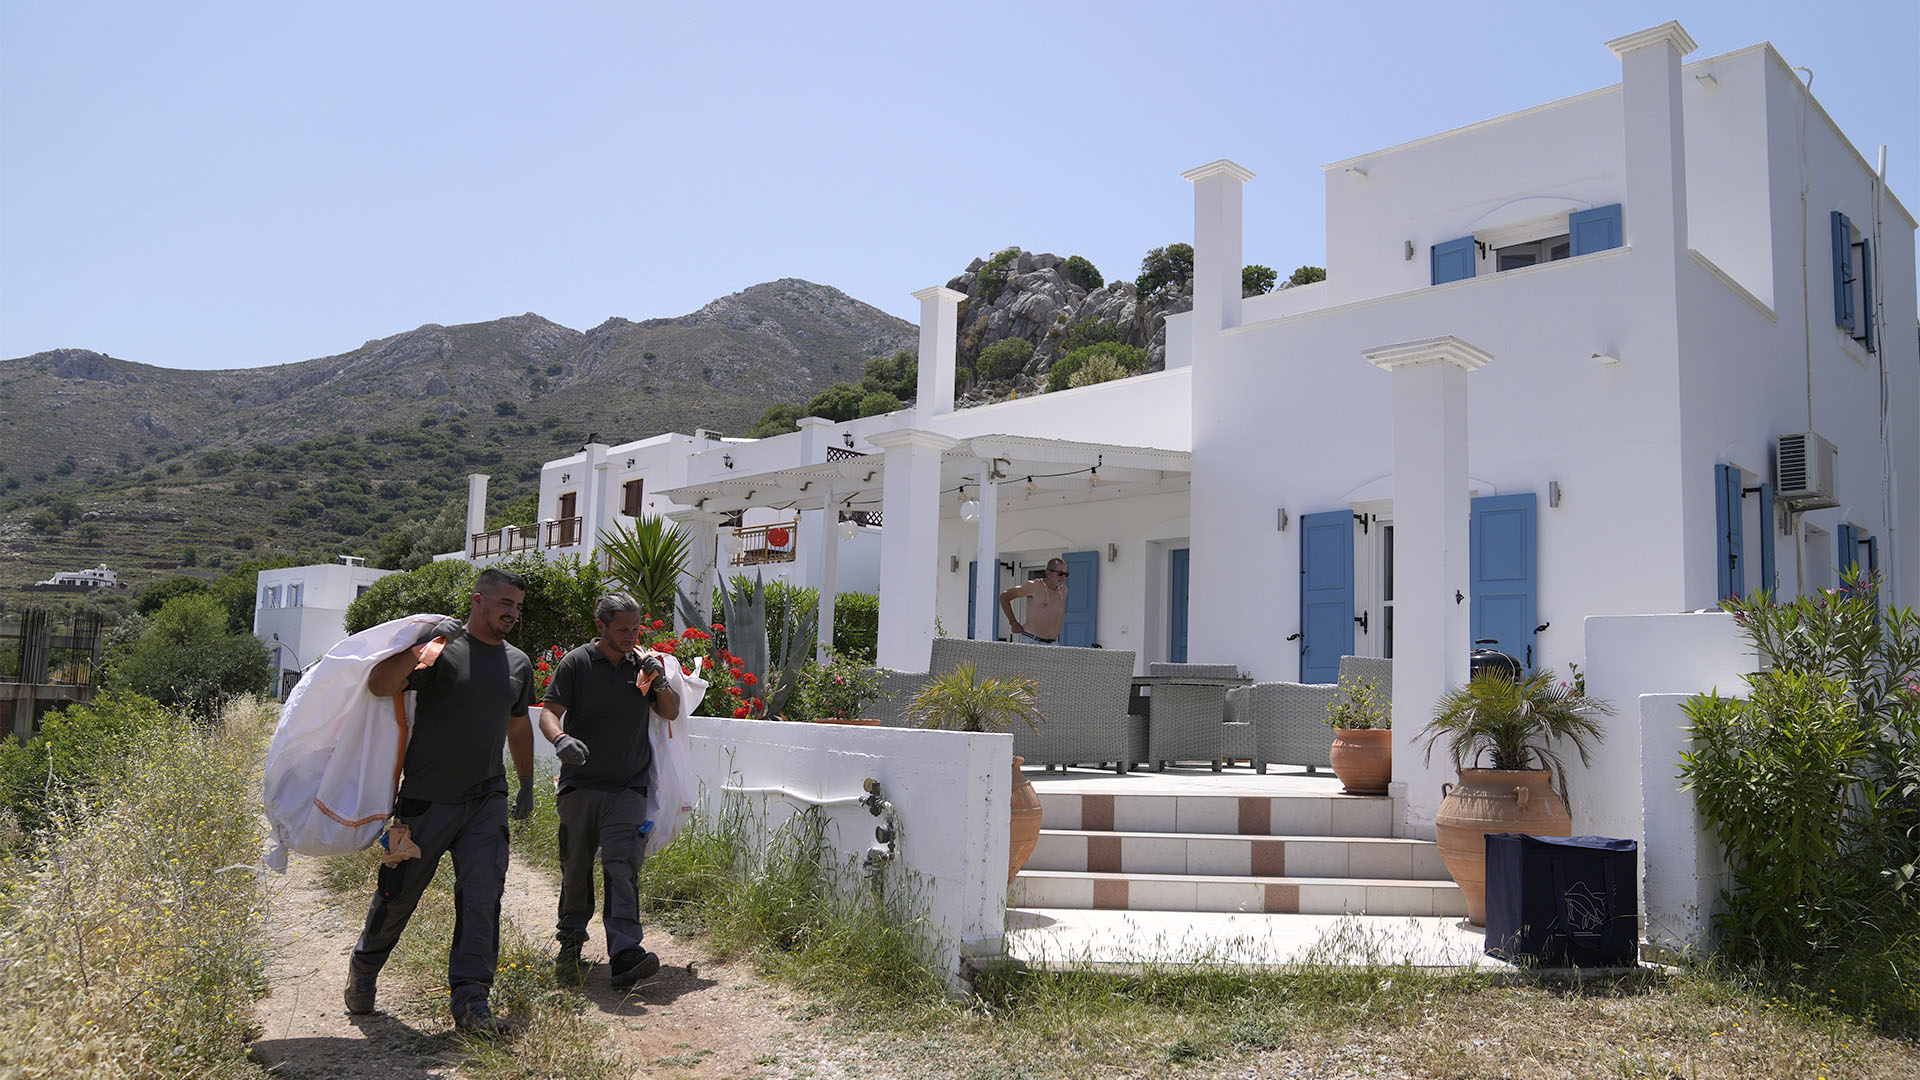 Tilos is expecting 30,000 visitors this summer, while the neighboring island of Rhodes will welcome more than 2 million (AP Photo/Thanassis Stavrakis)